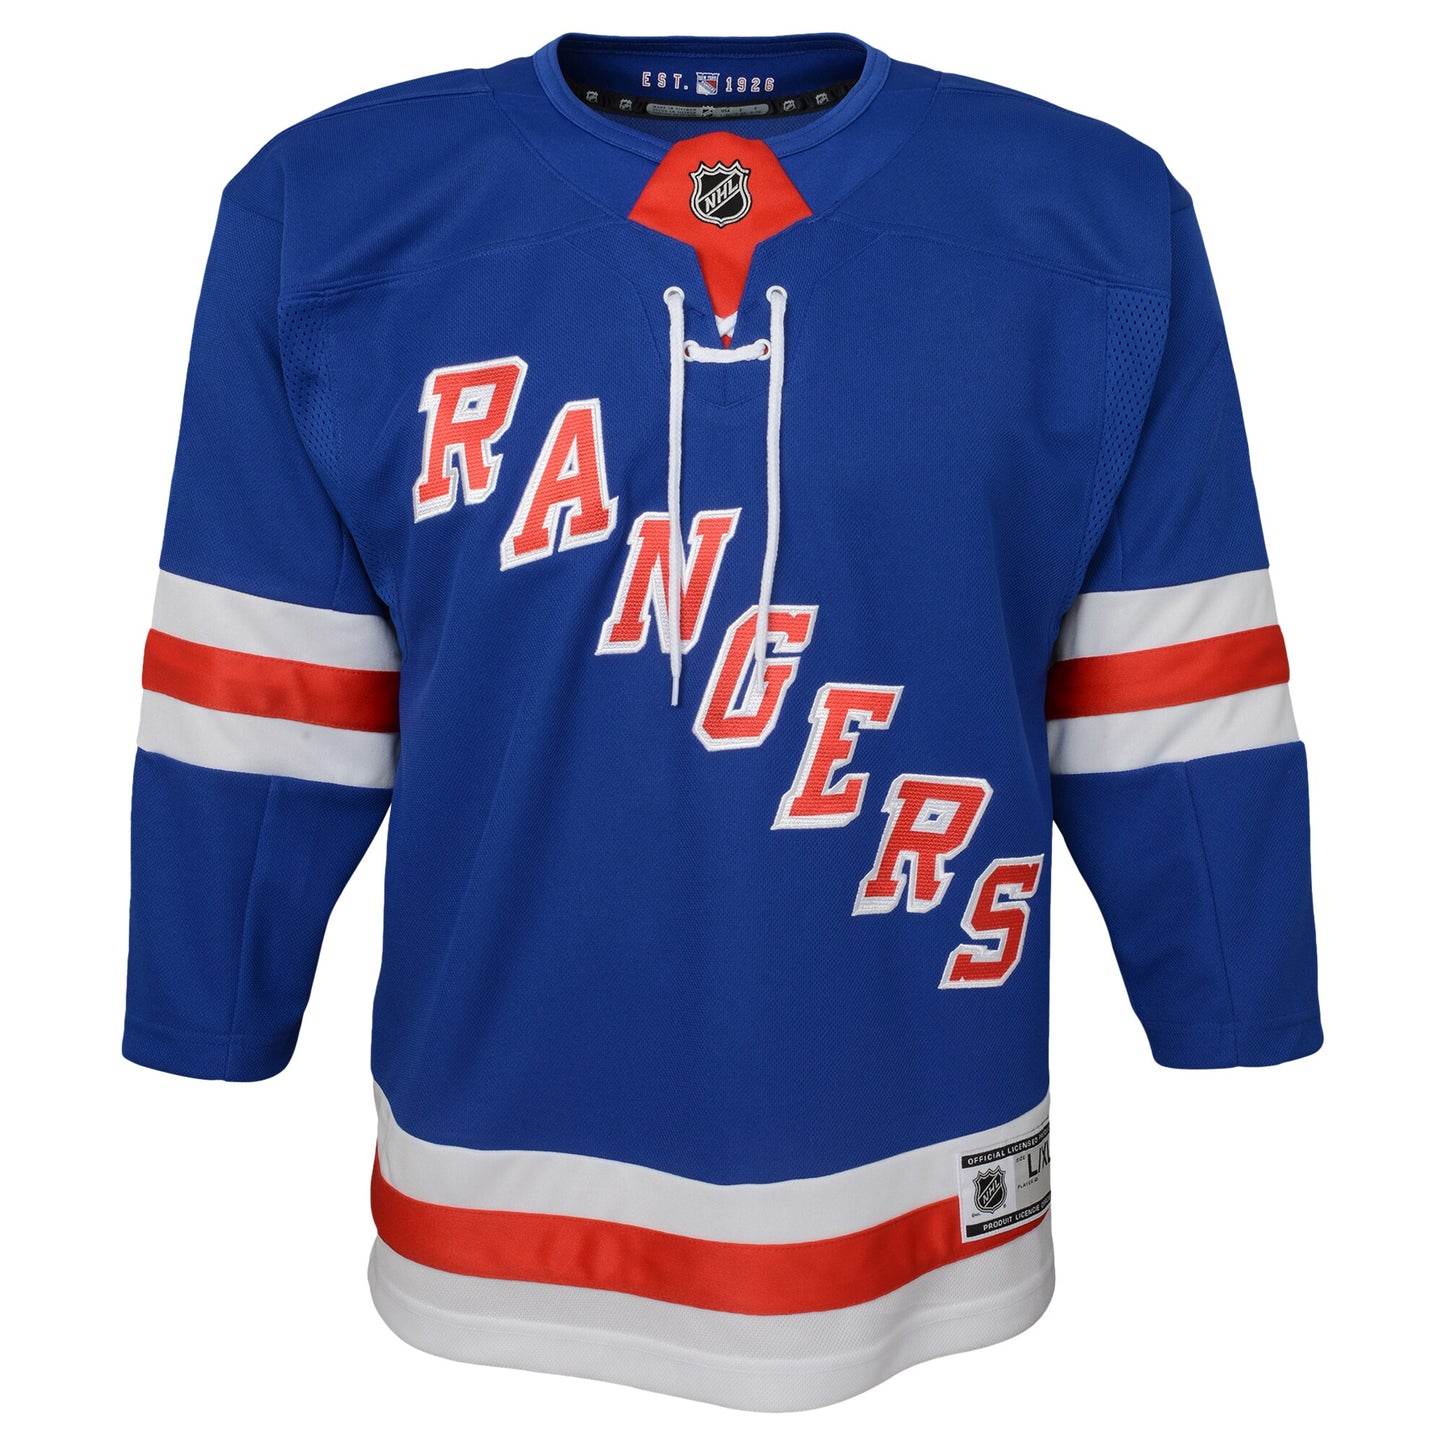 New York Rangers Youth Home Premier Jersey - Blue